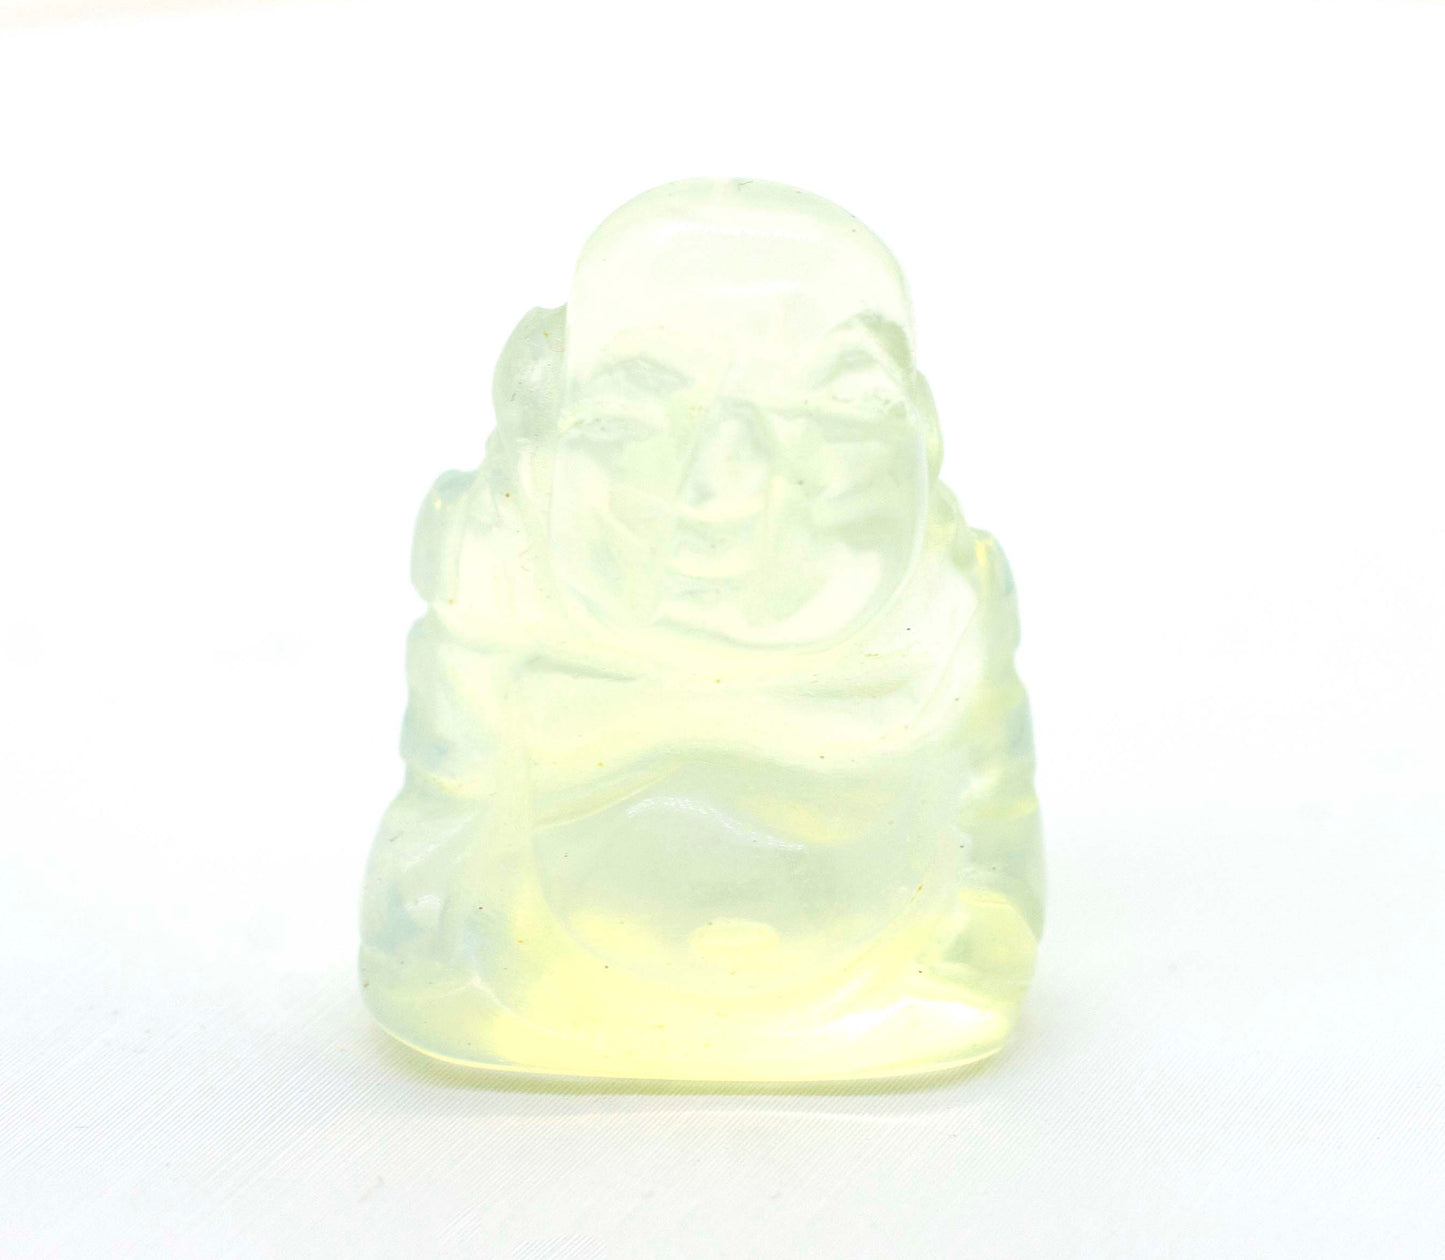 A small Laughing Buddha Gemstone Figure sitting on a white surface.